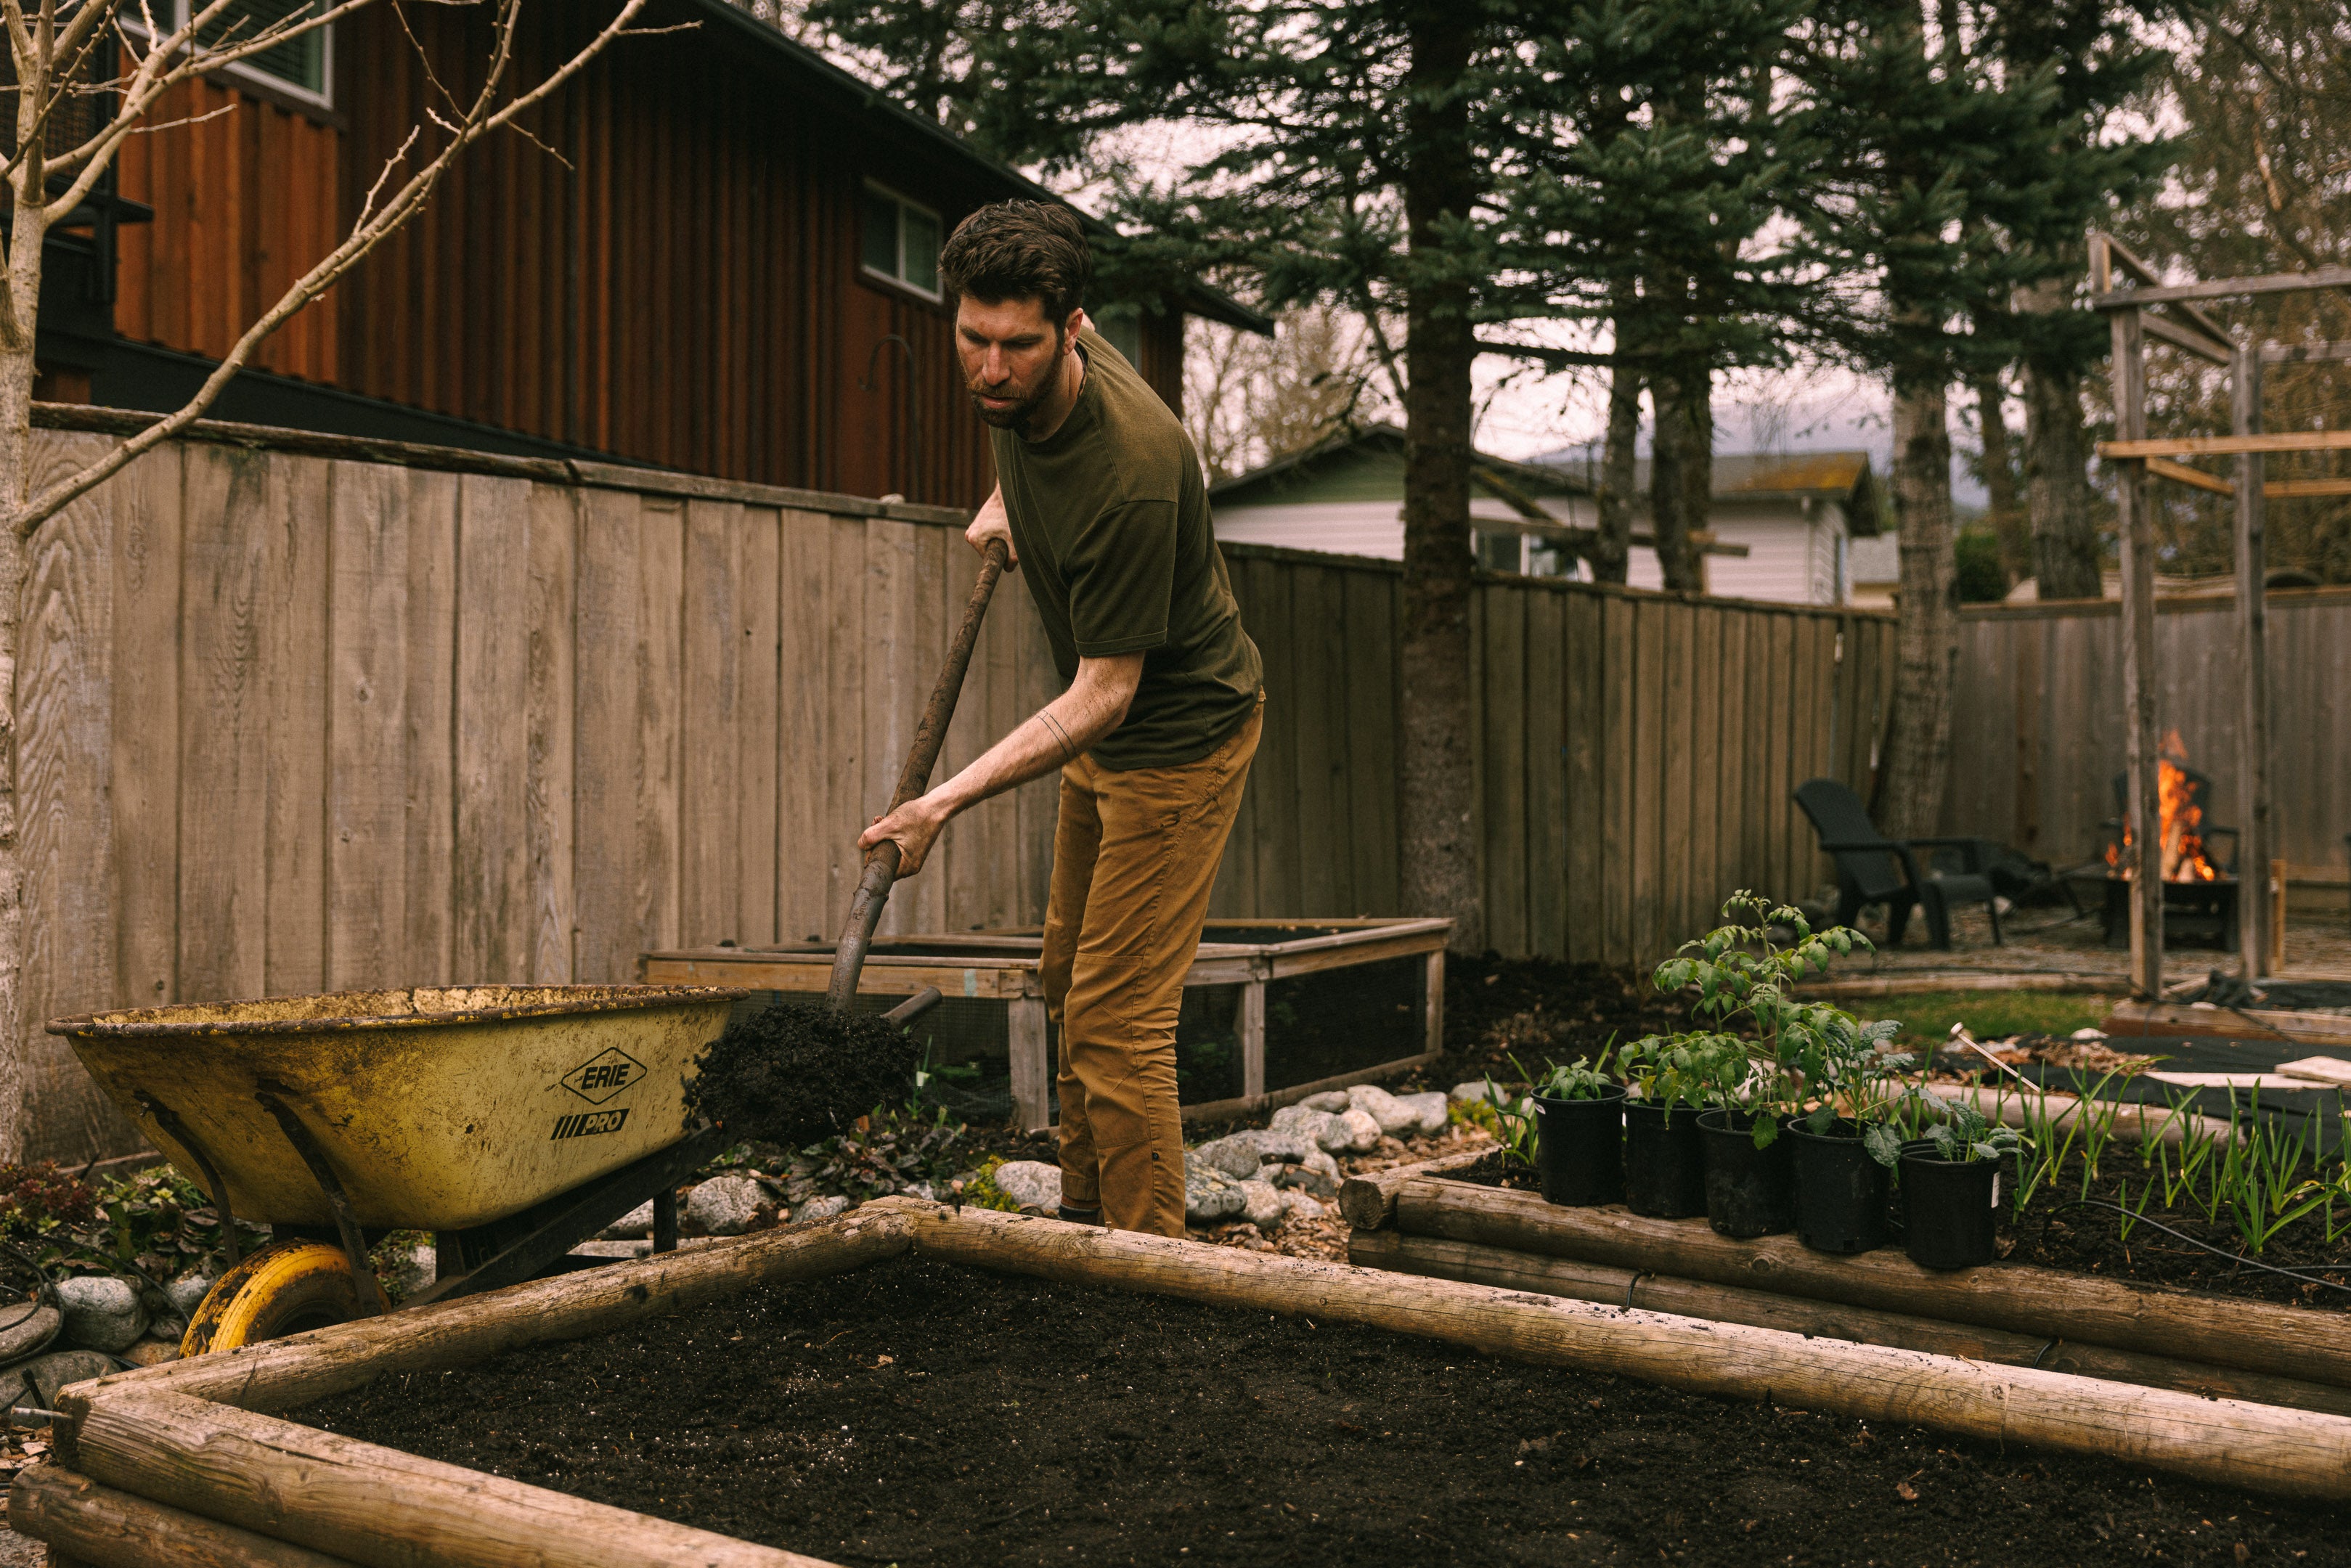 Applying compost across the entirety of a garden bed